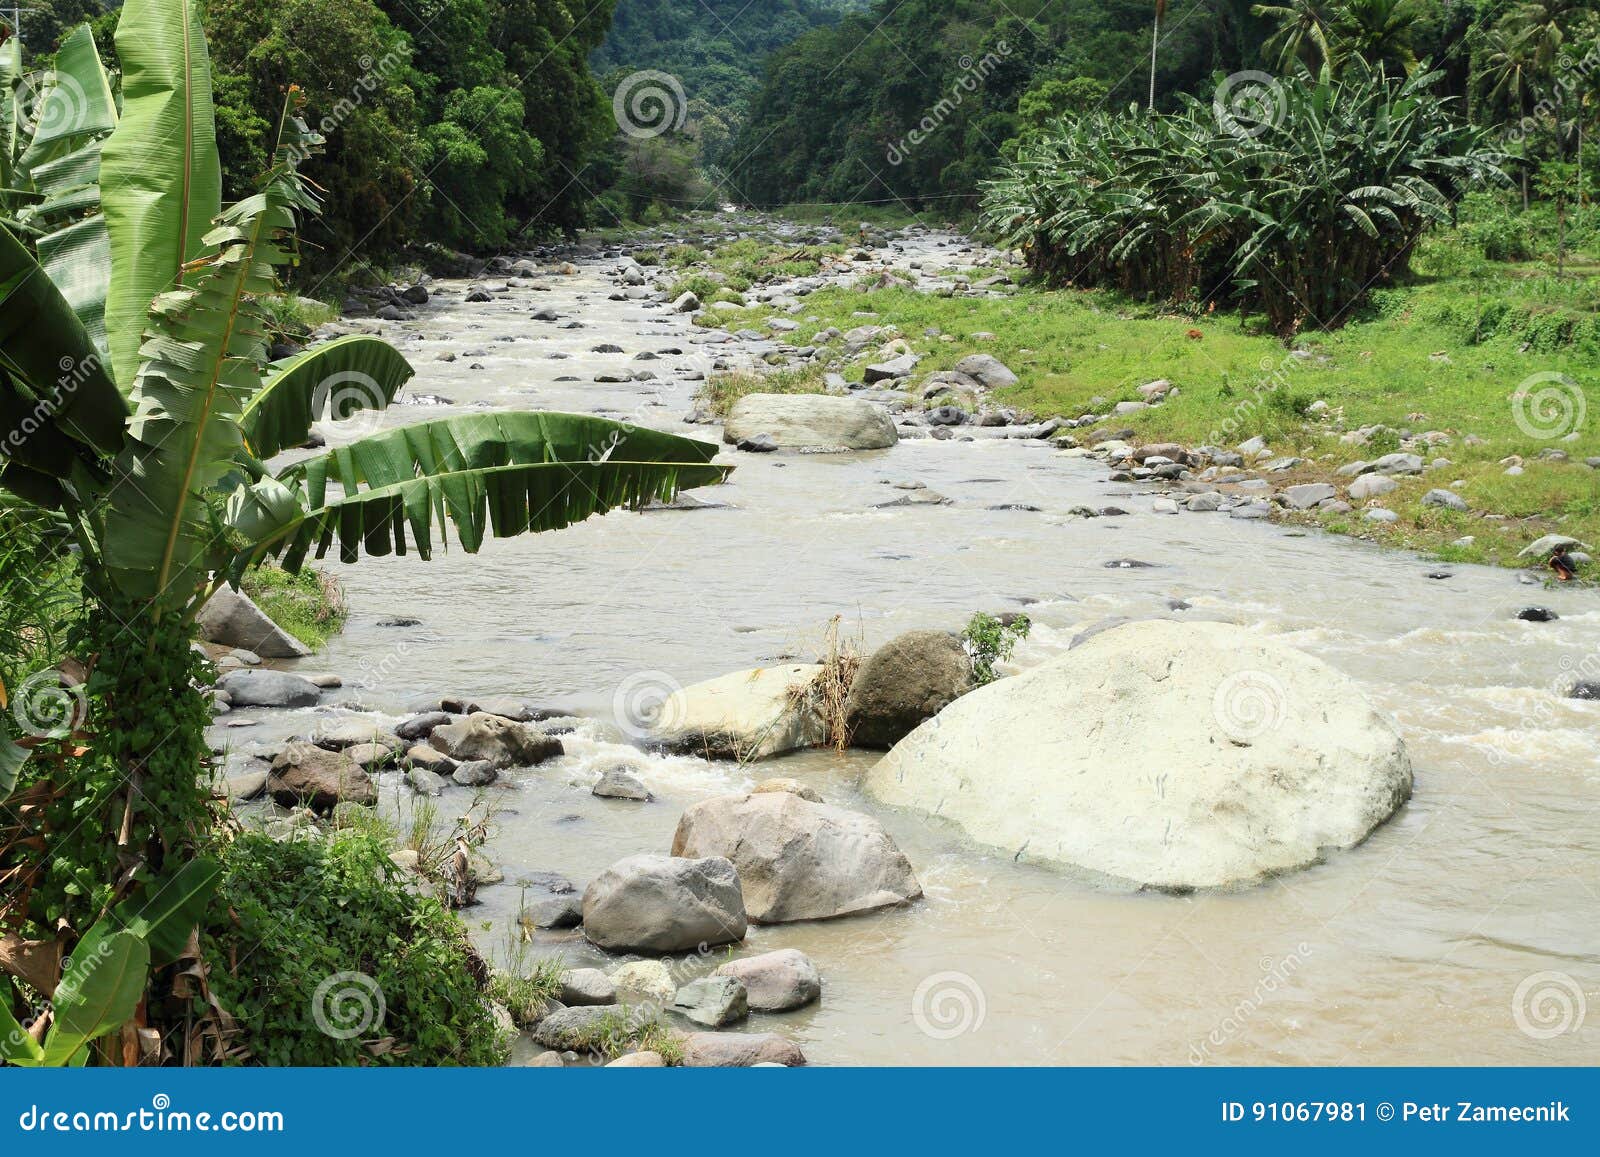 river in mountains on flores